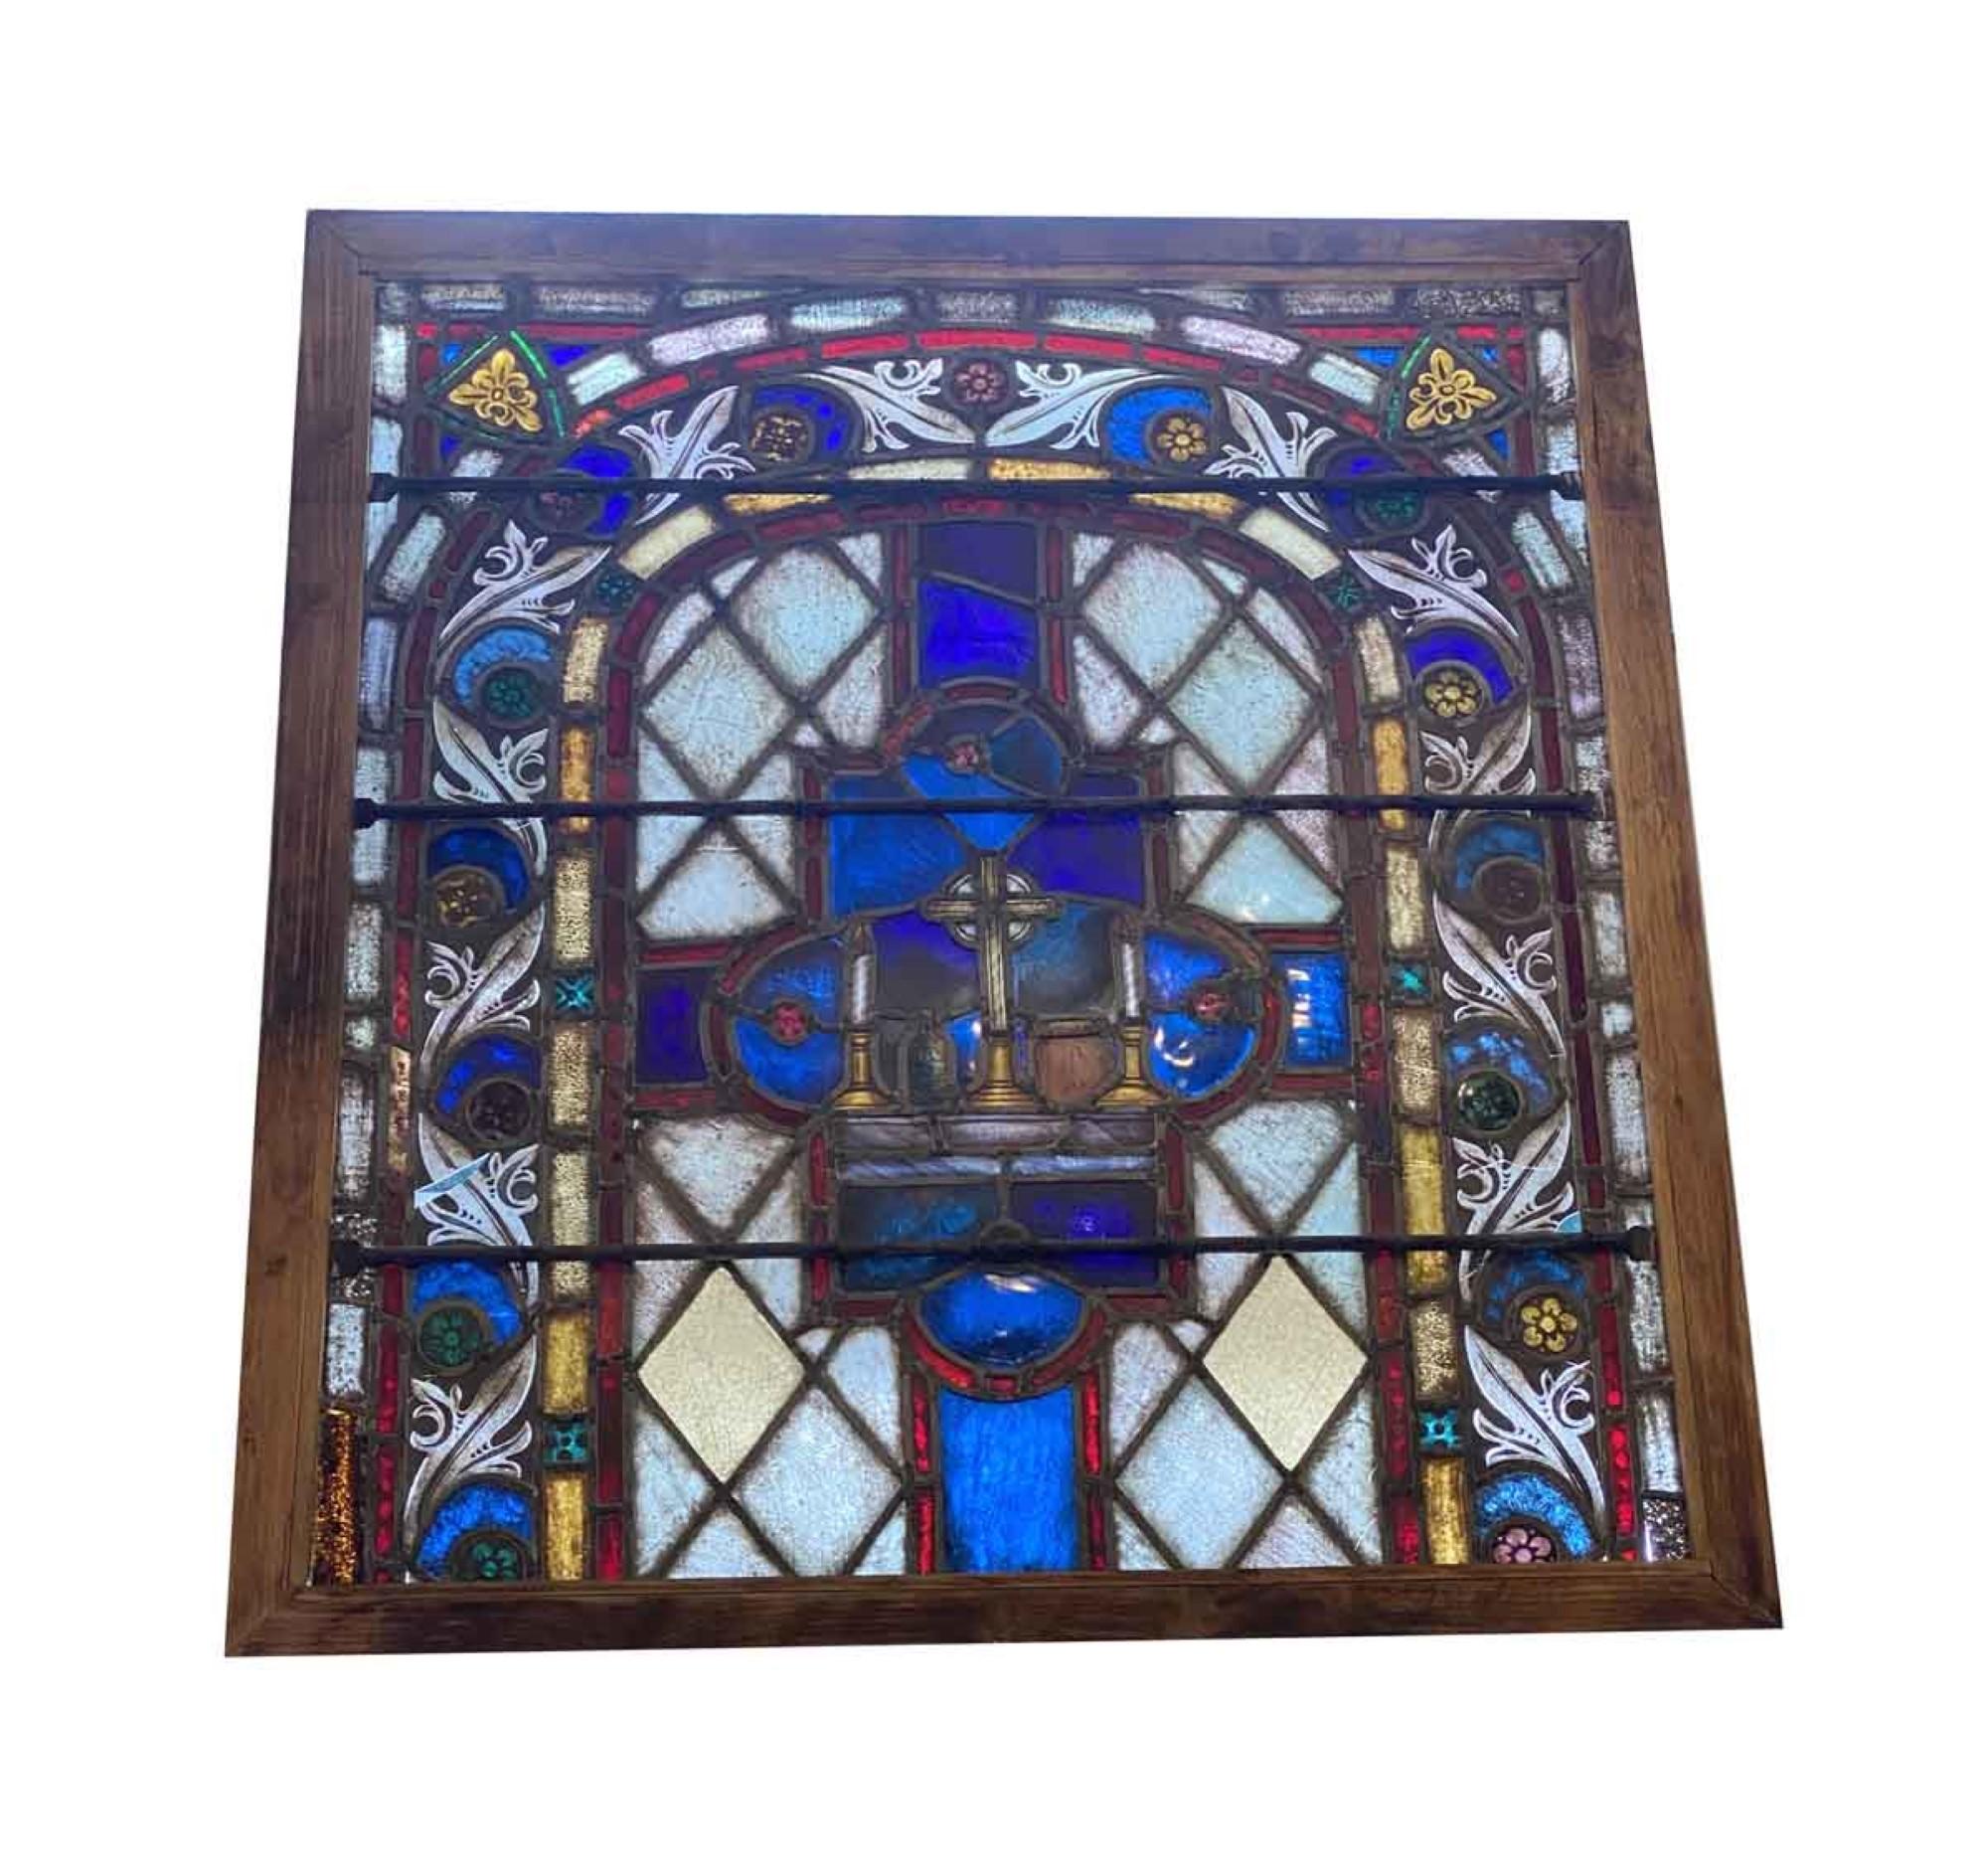 This 19th century antique wood framed stained glass window from Germany. Originally this was in a larger church window but was reframed in a smaller frame. Featuring very deep and vibrant blue, red and yellow colors. Some damage as shown in the